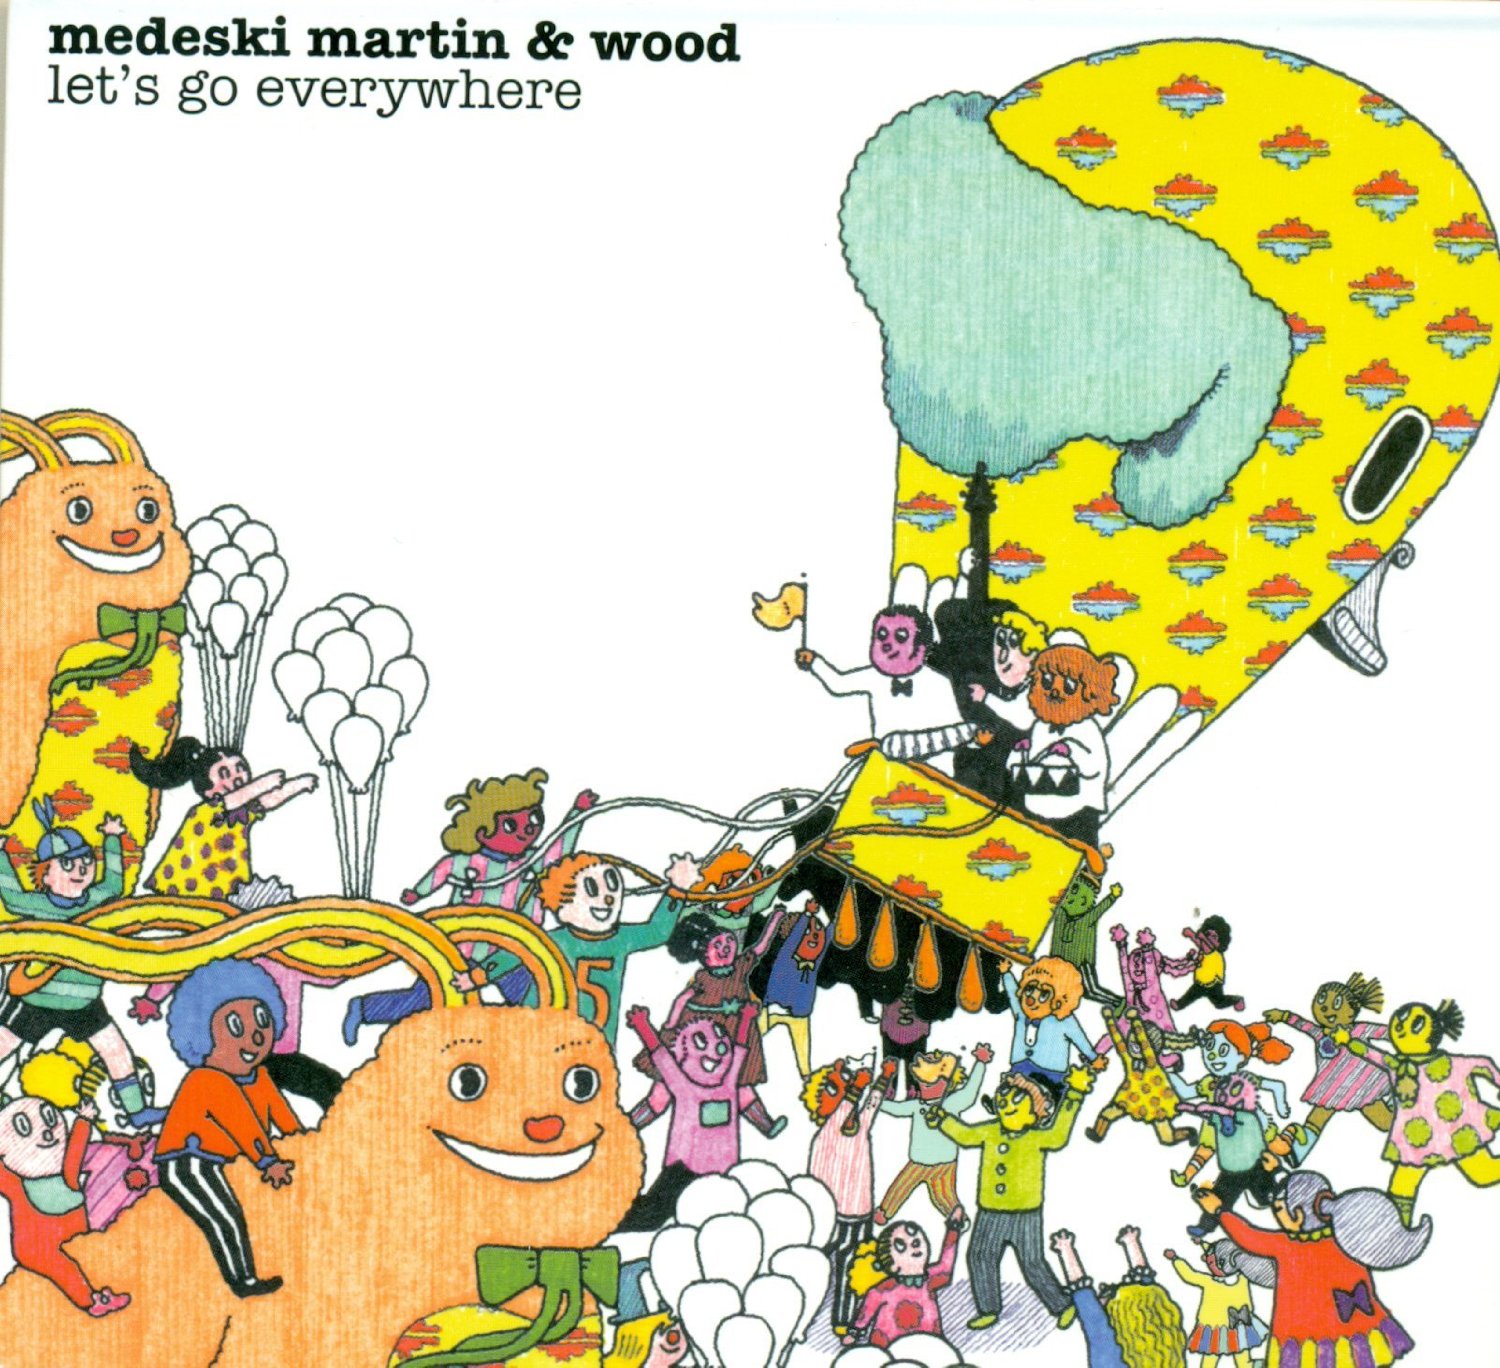 Medeski Martin & Wood's Let's Go Everywhere is out now.Medeski Martin & Wood's Let's Go Everywhere is out now.